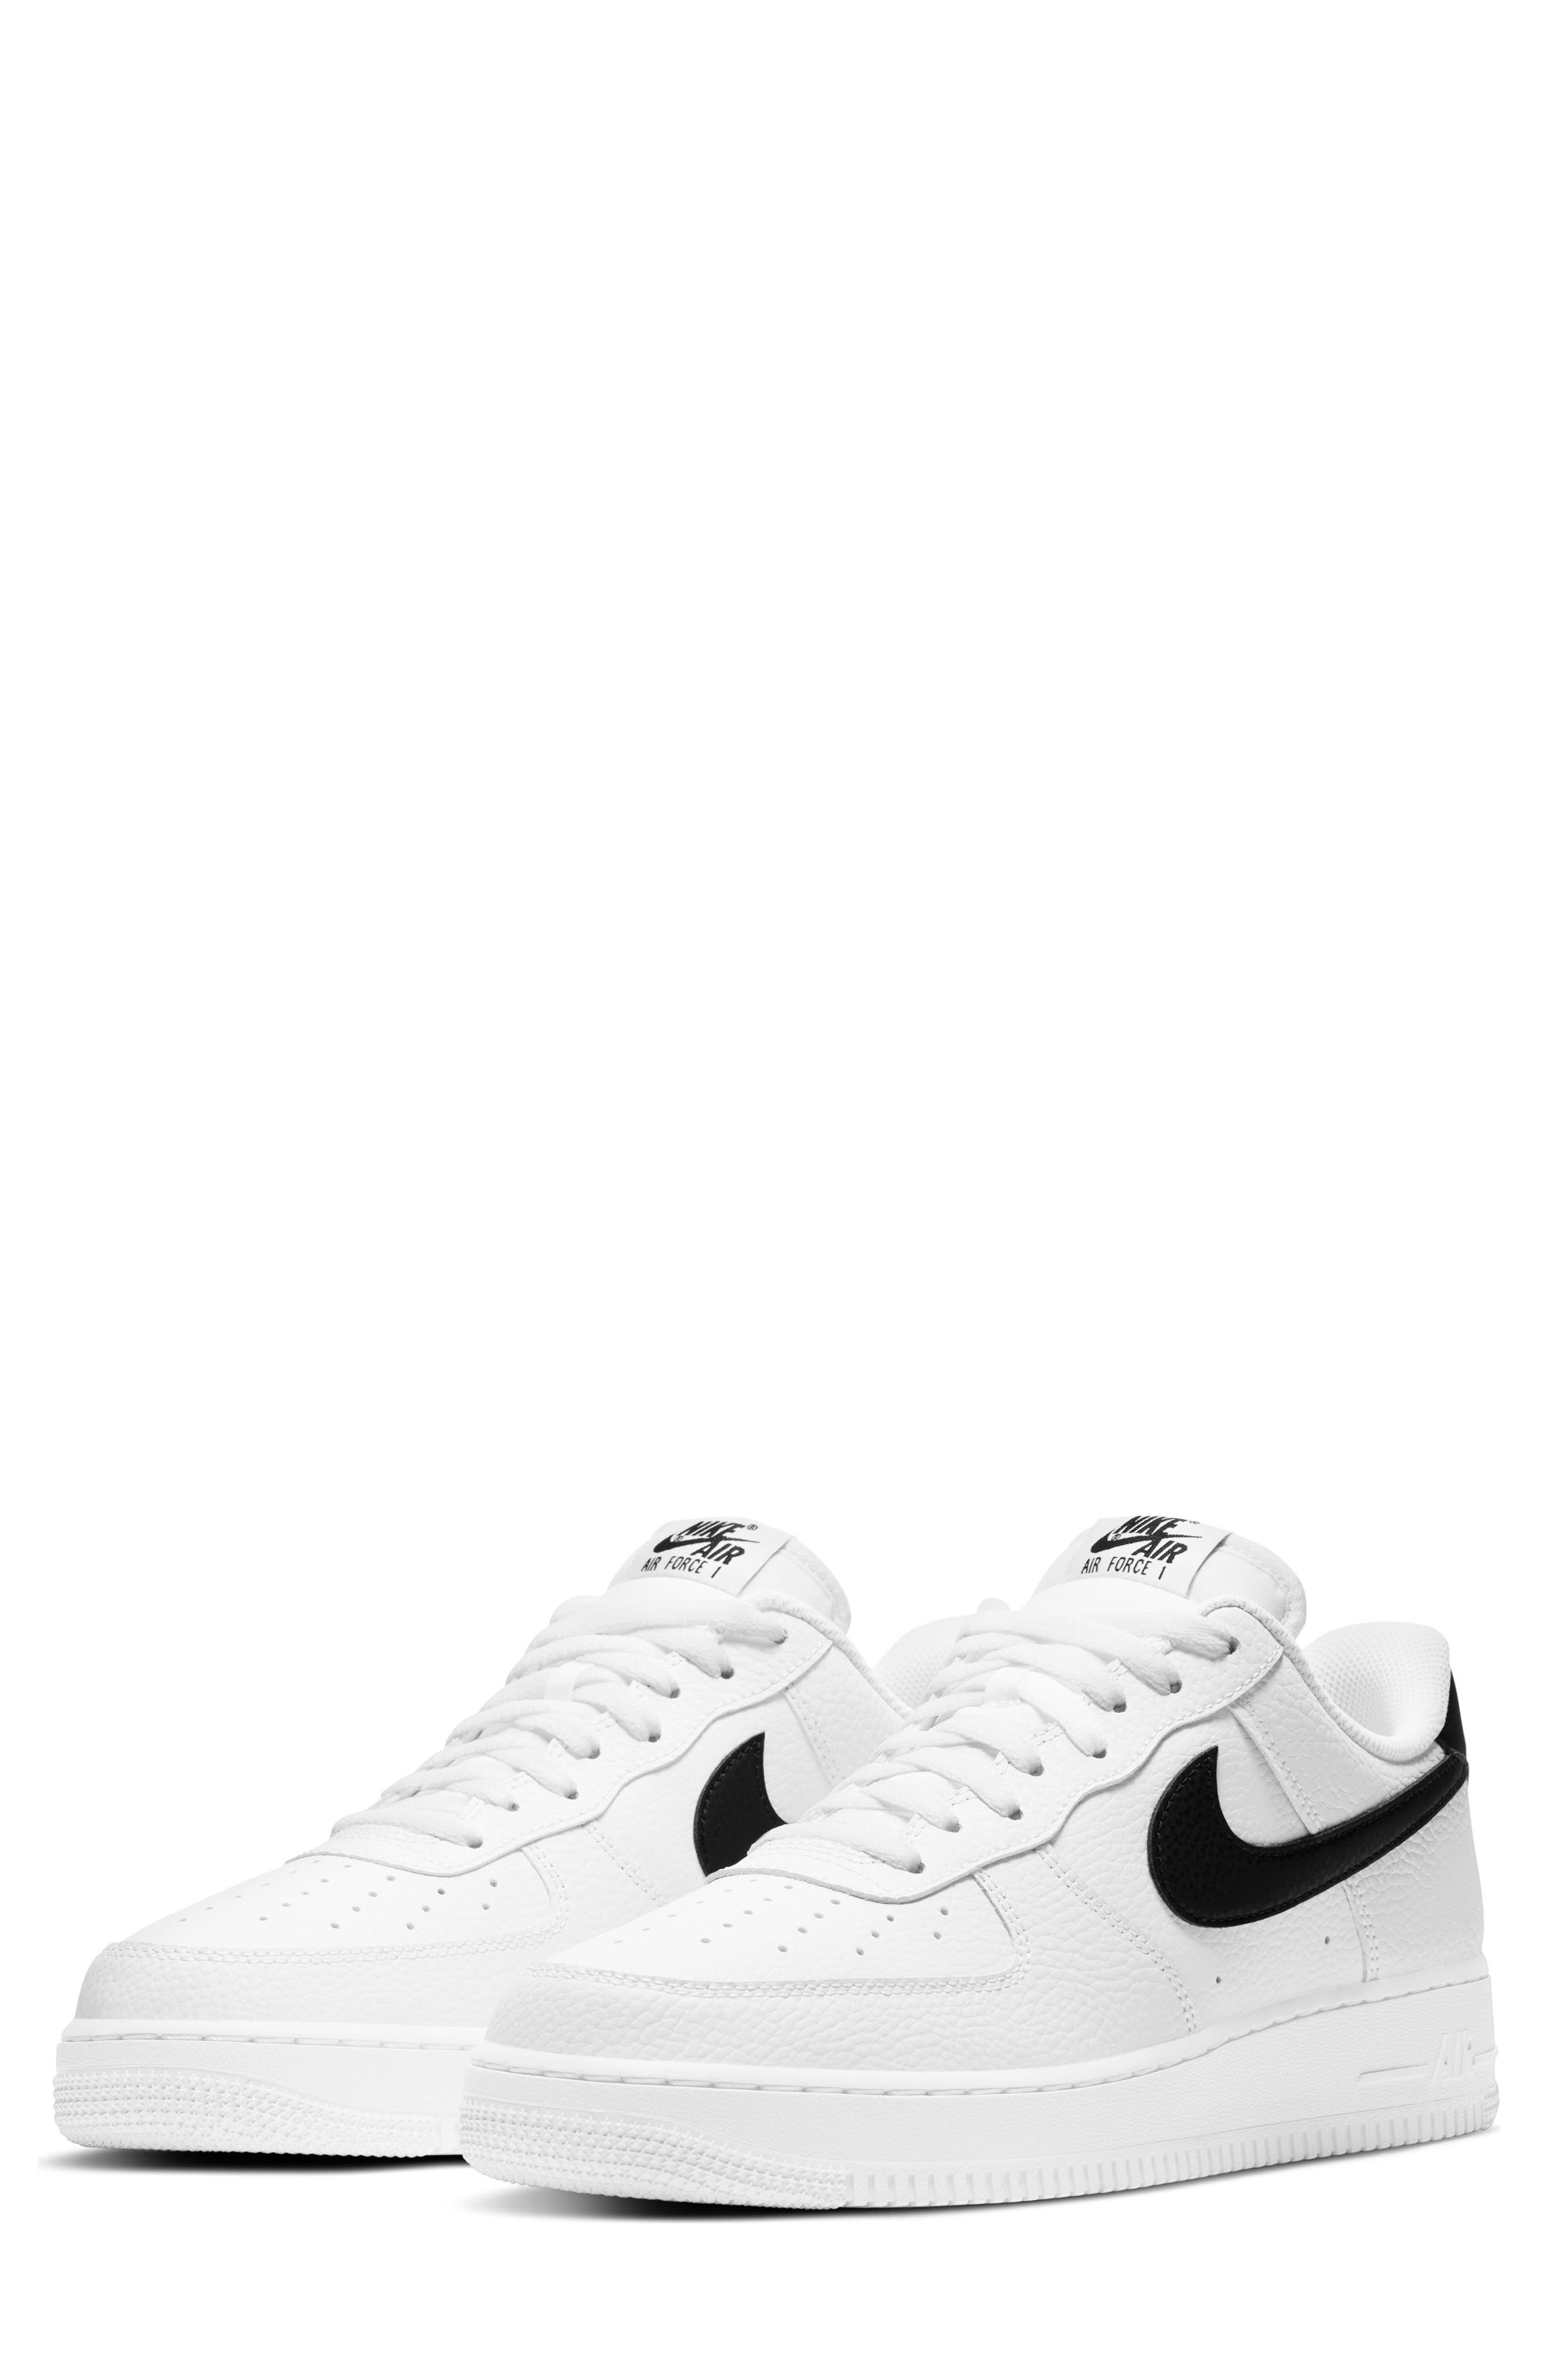 nike casual shoes black and white